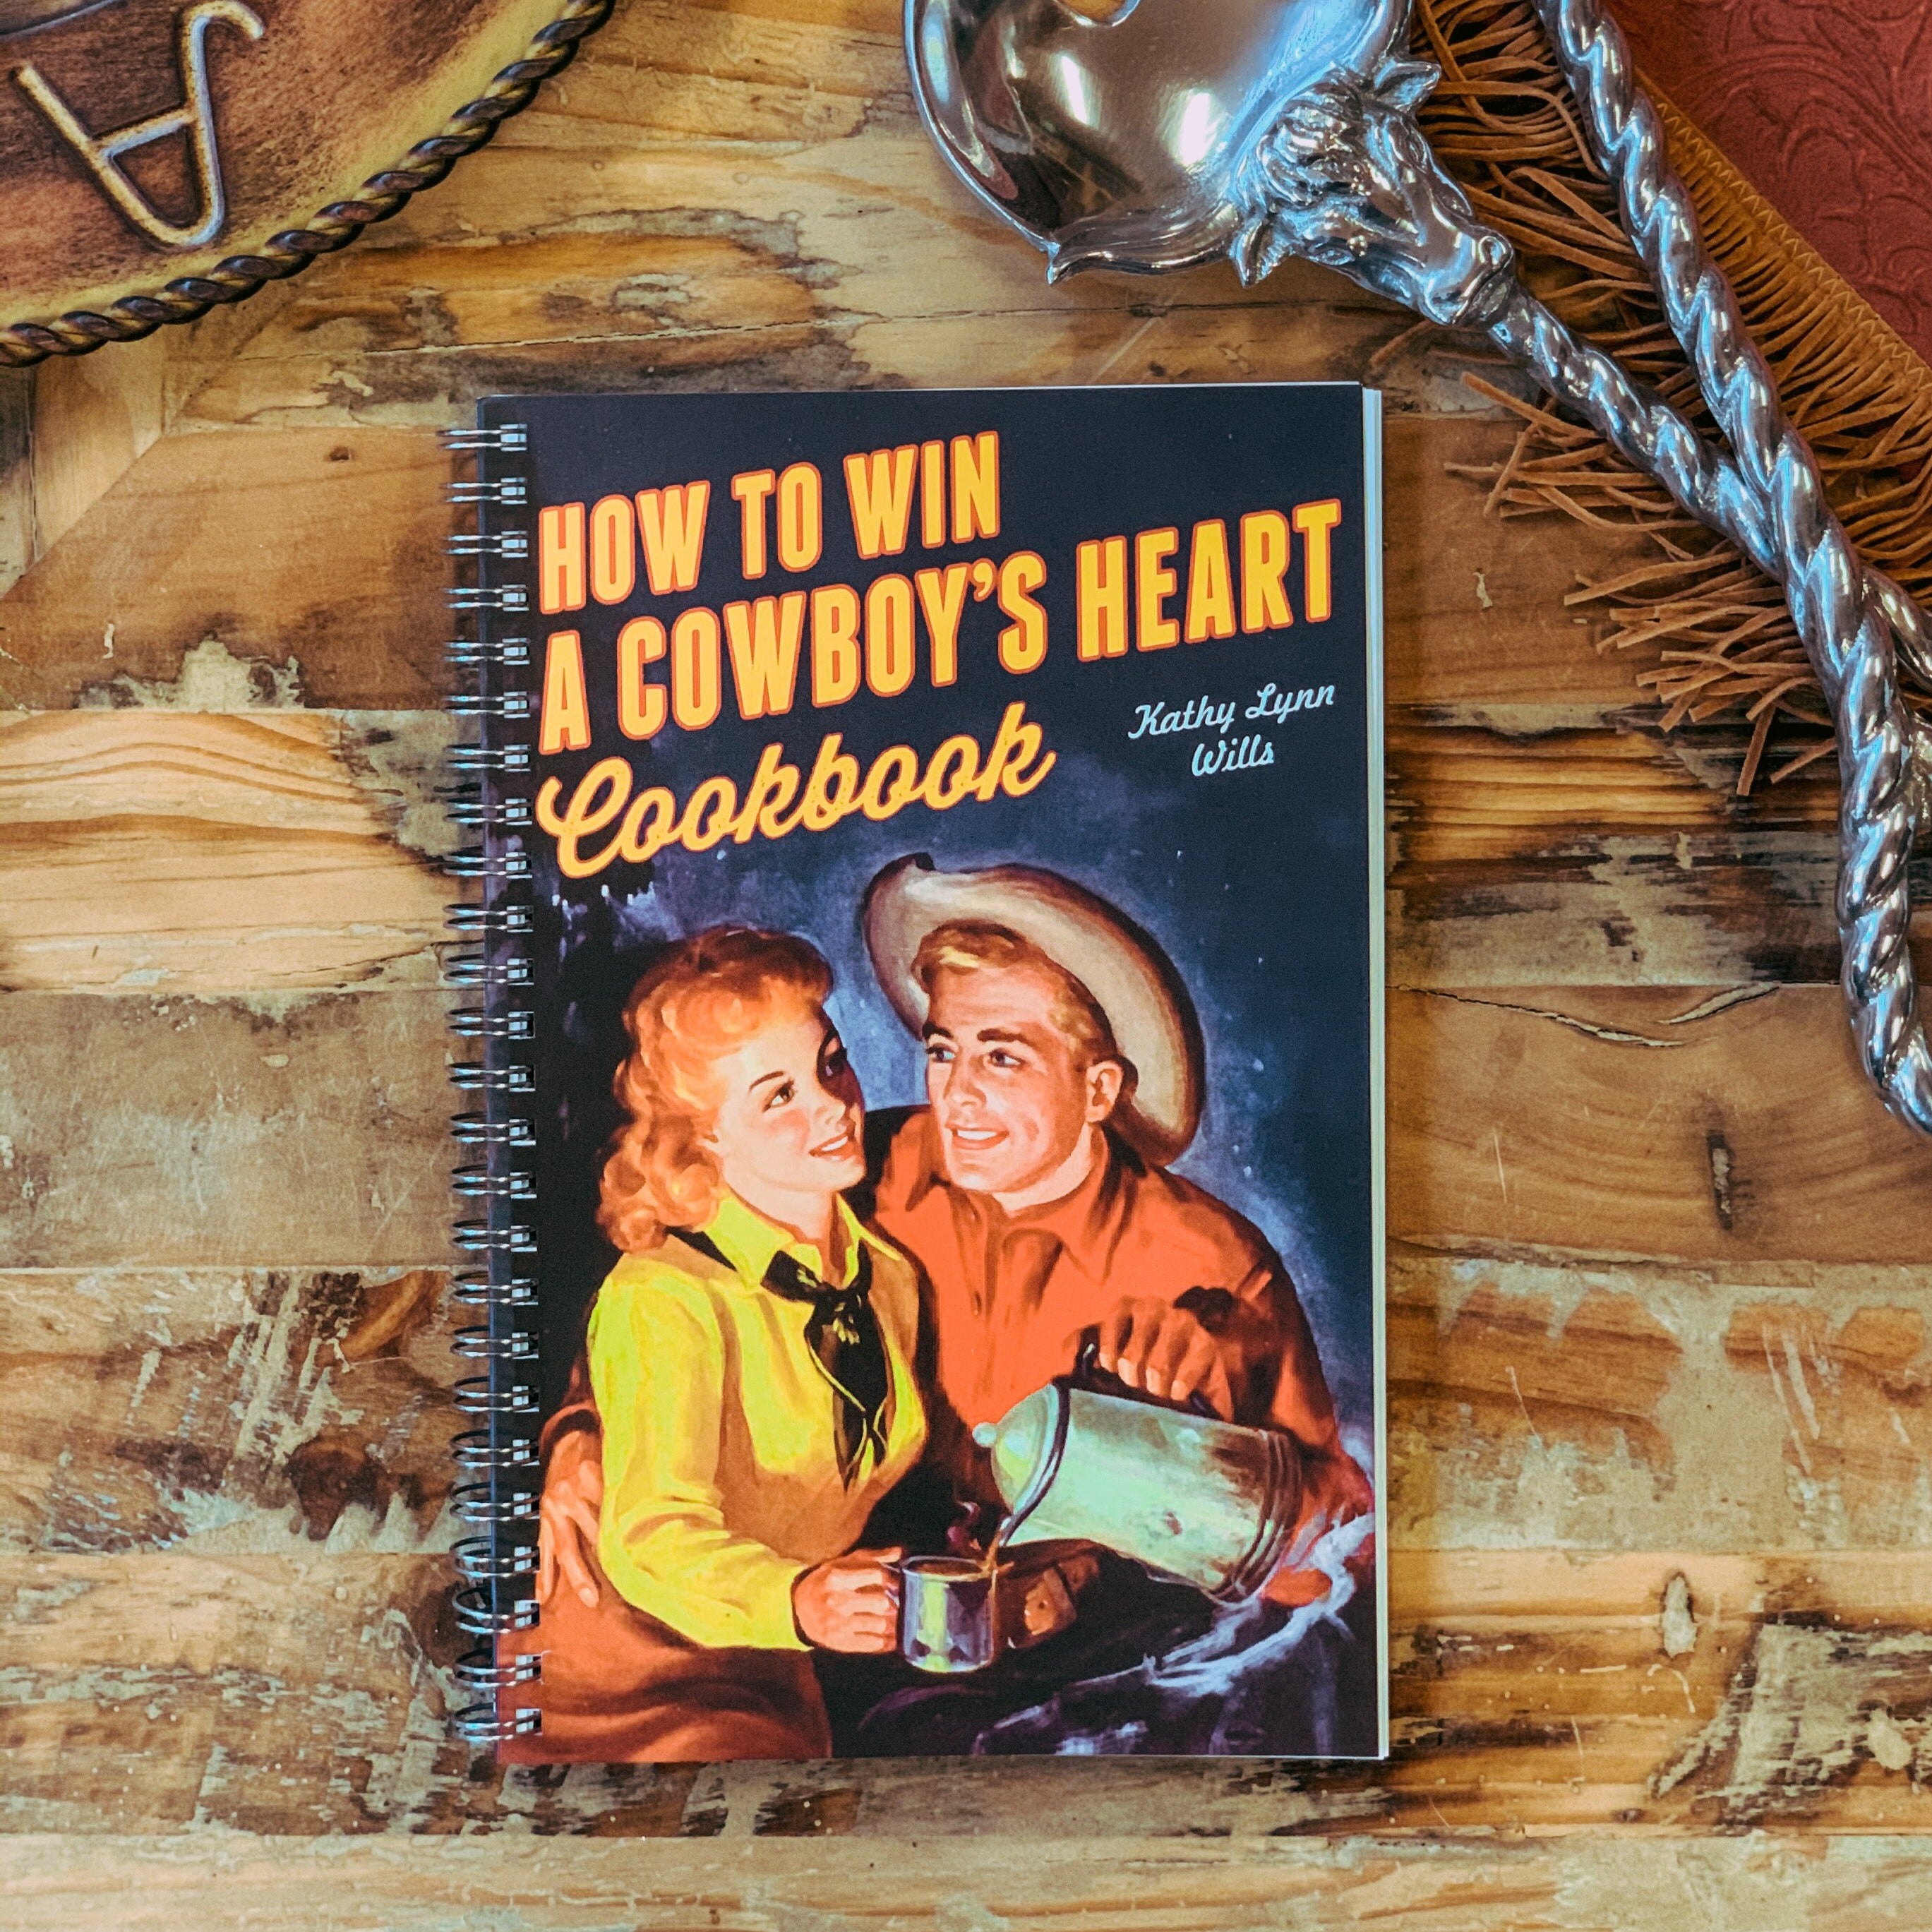 How To Win A Cowboy's Heart